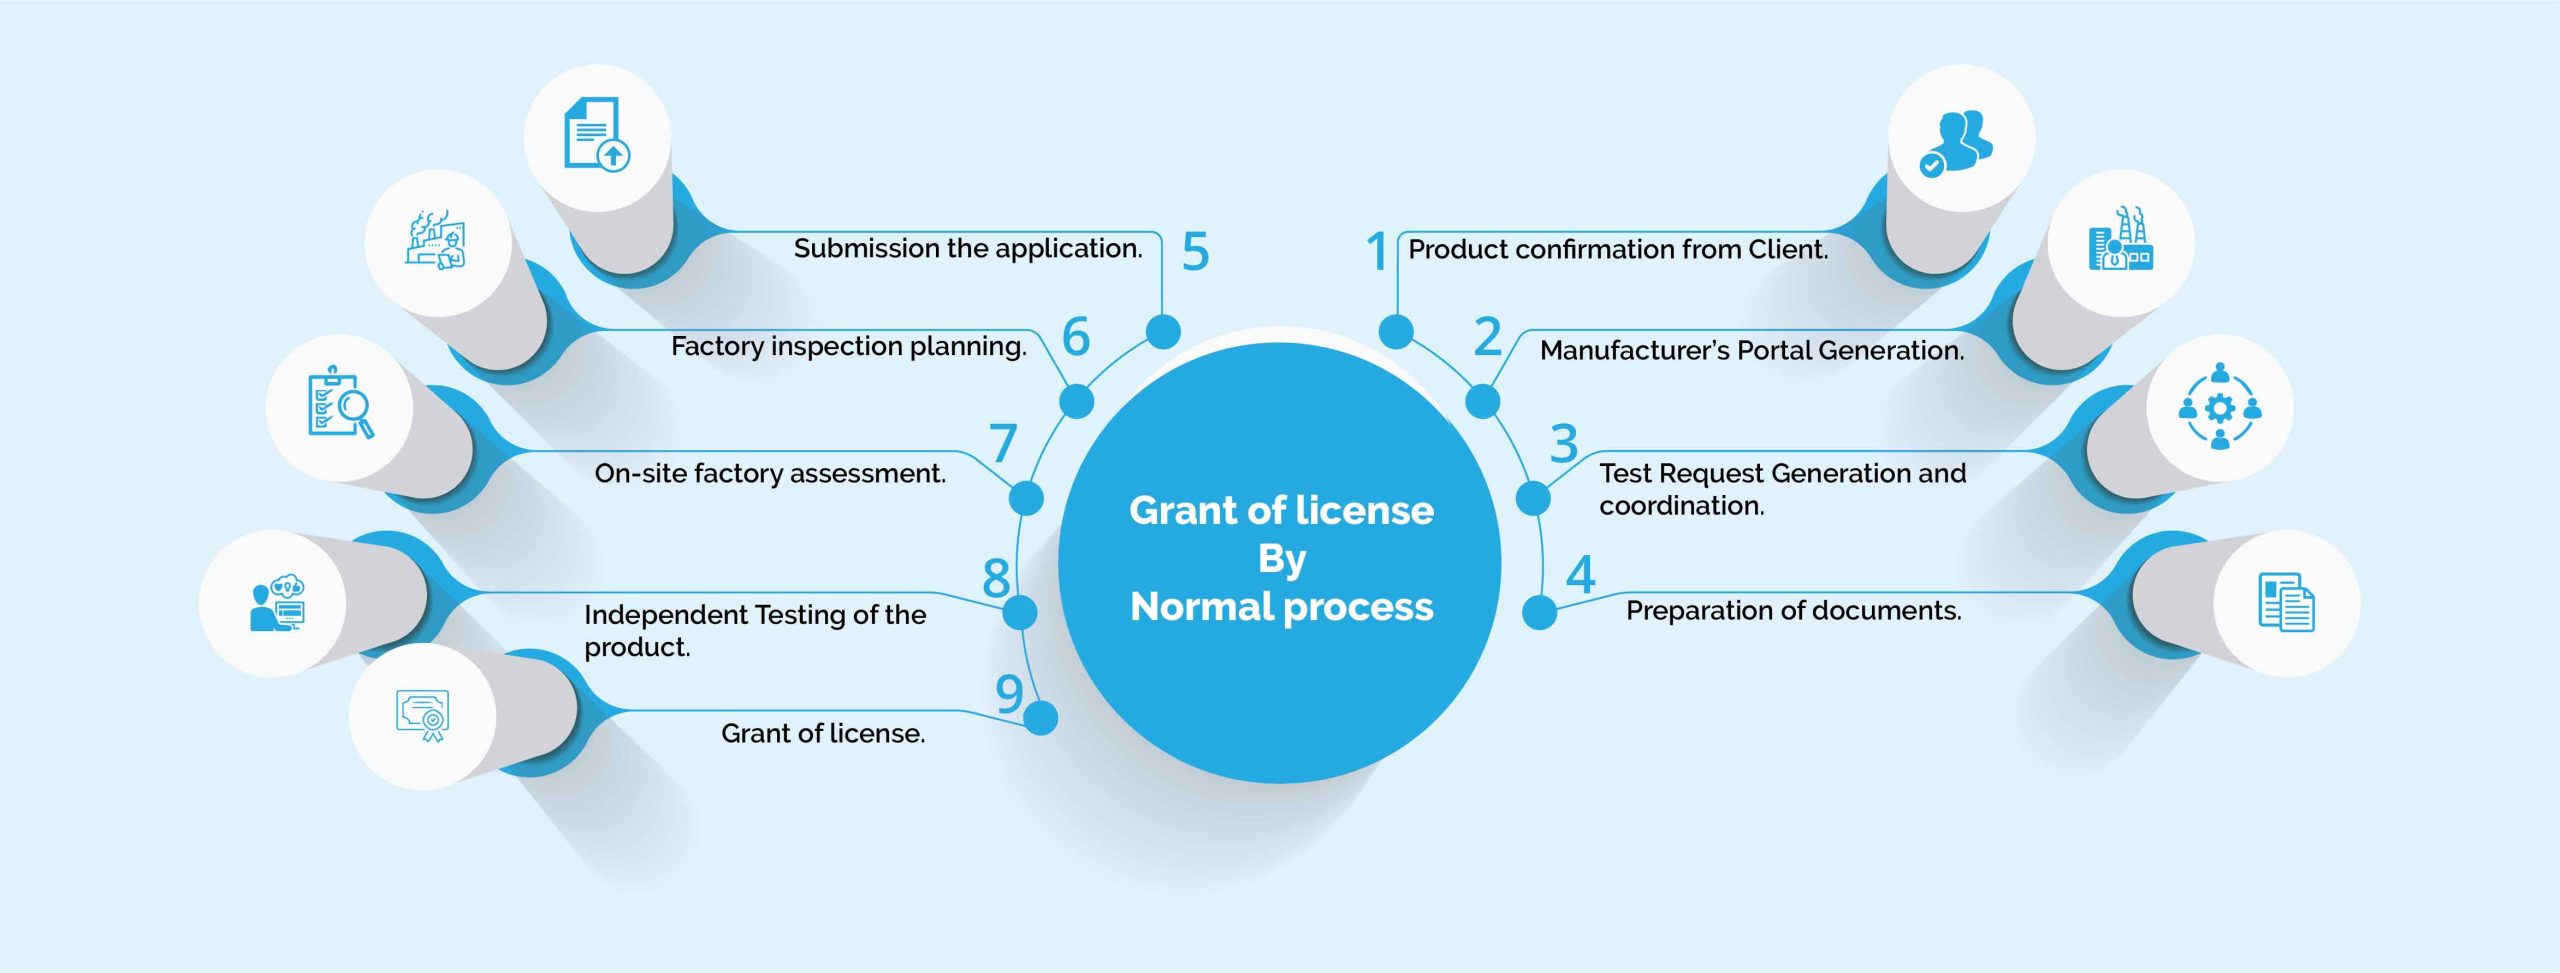 GRANT OF LICENSE BY NORMAL PROCESS